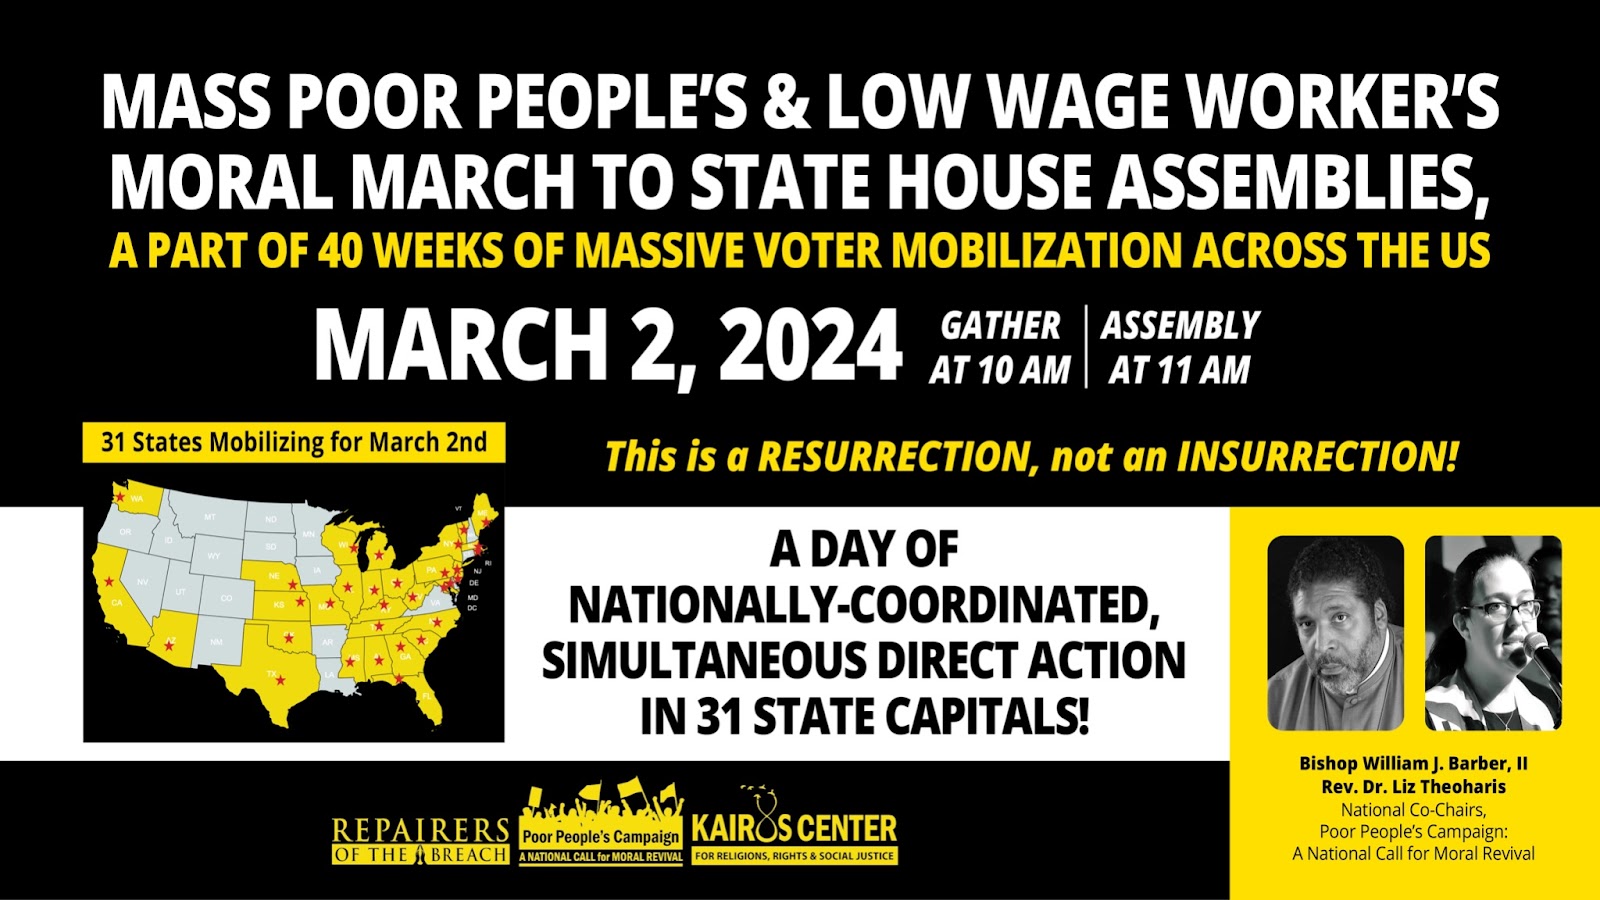 Join the Indiana Poor People’s Campaign: A National Call for Moral Revival on Saturday, March 2, 2024